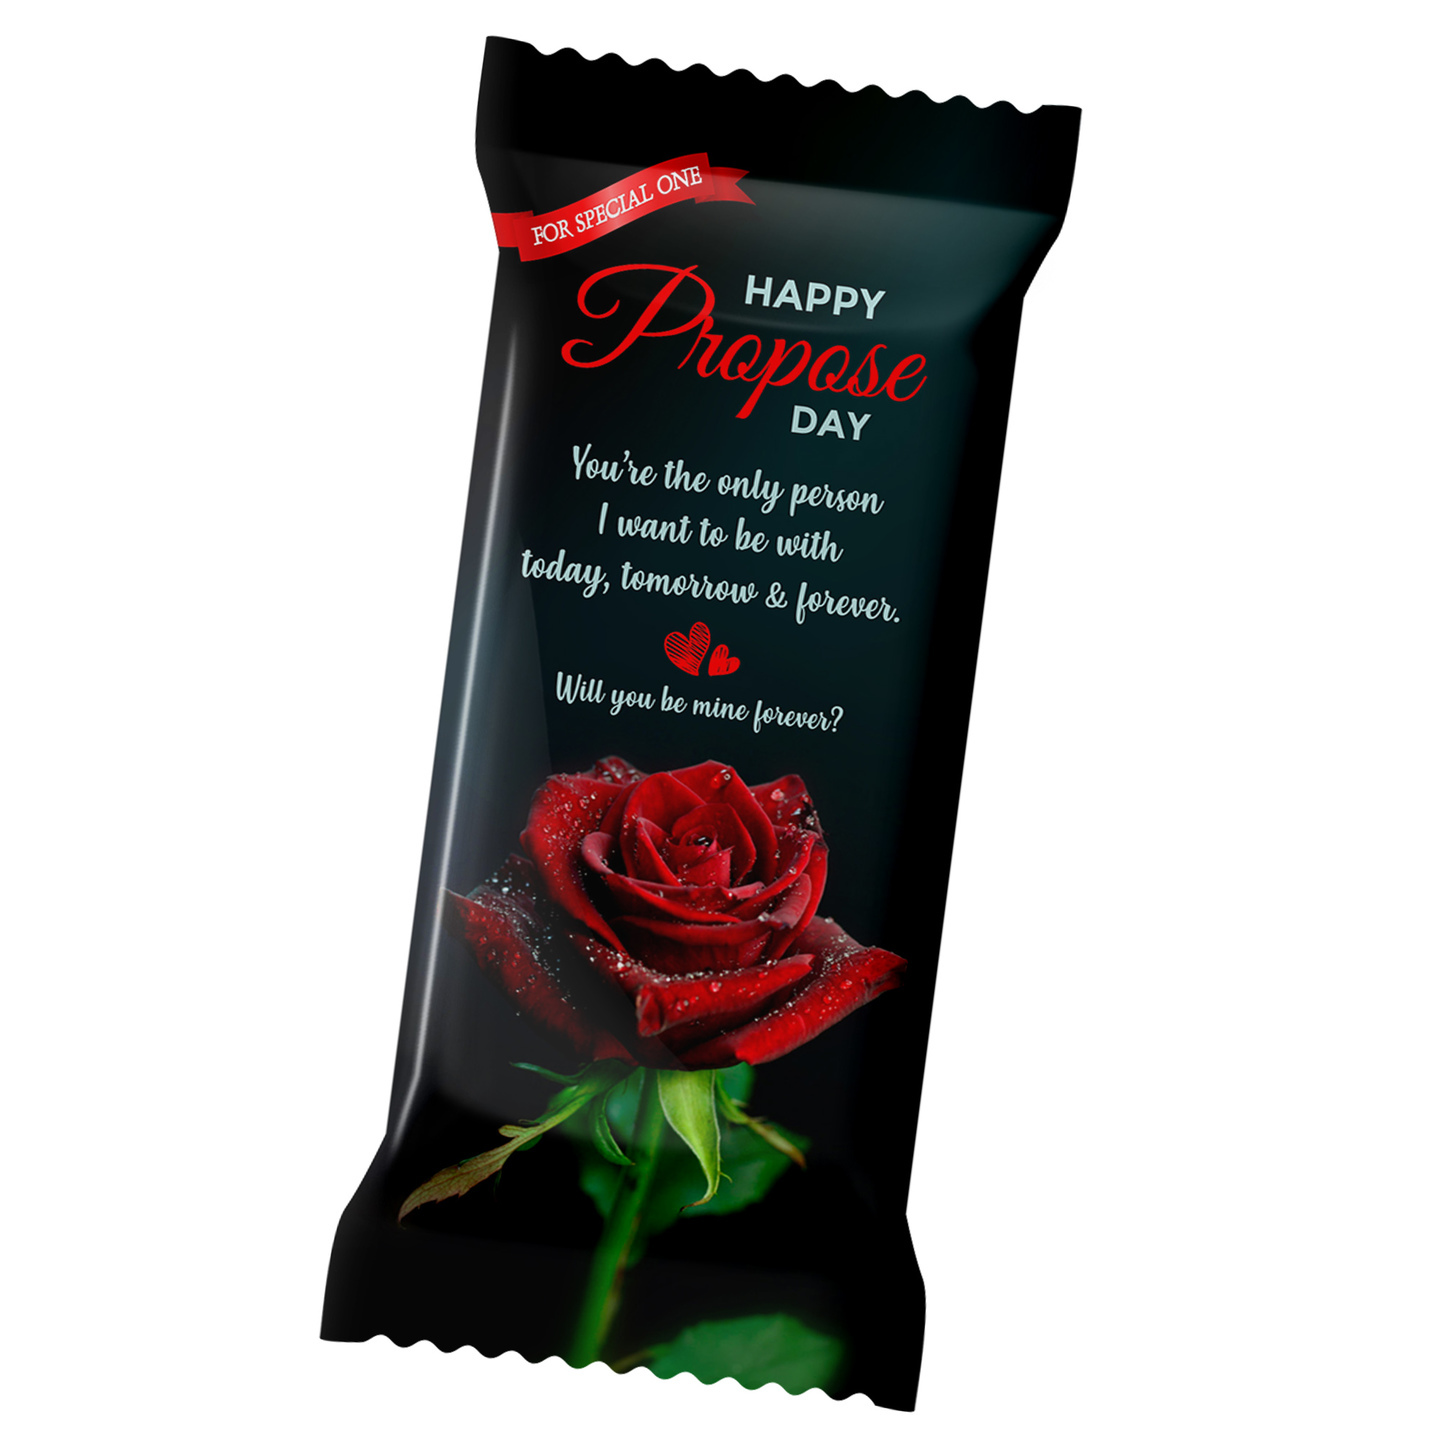 Propose Day Personalized Chocolate Bar 100g